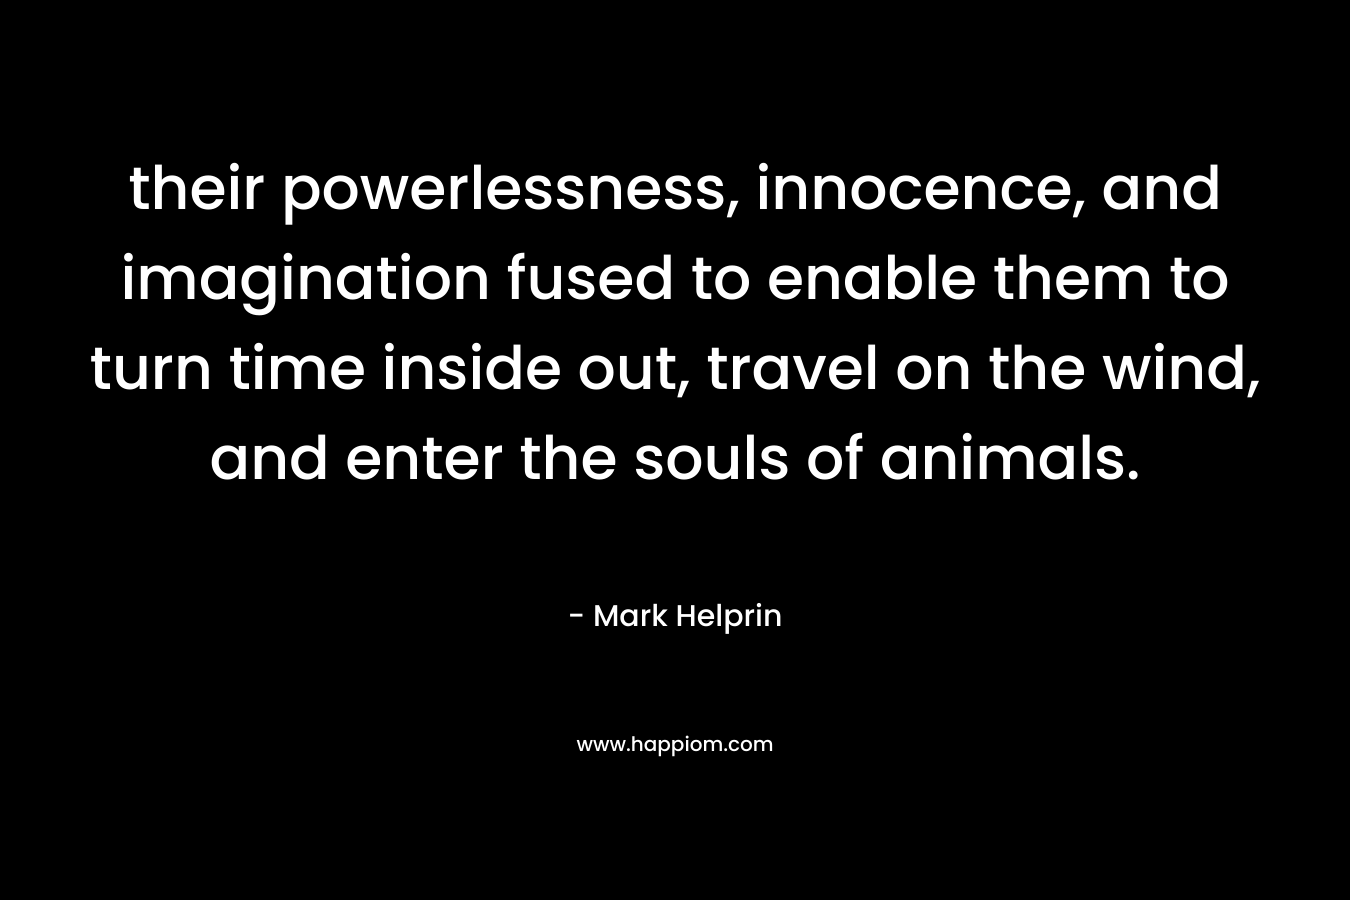 their powerlessness, innocence, and imagination fused to enable them to turn time inside out, travel on the wind, and enter the souls of animals.